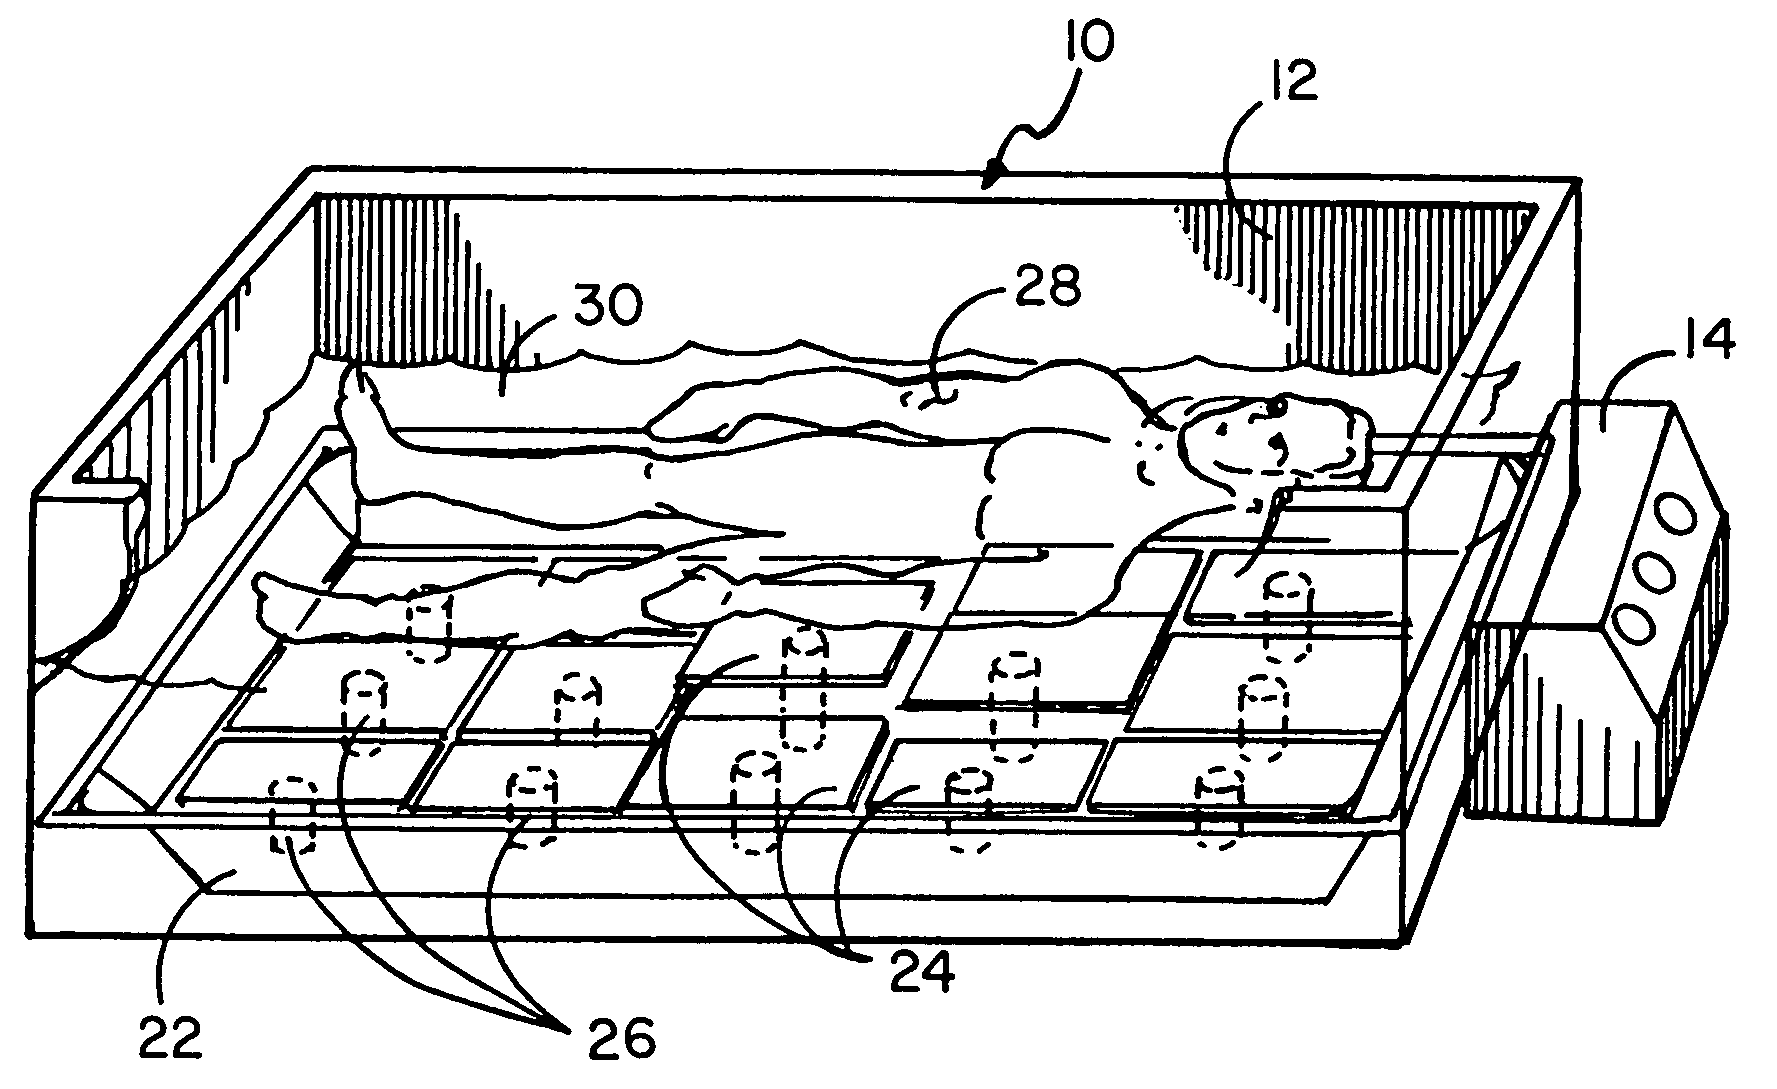 Wave exercise device and method of use